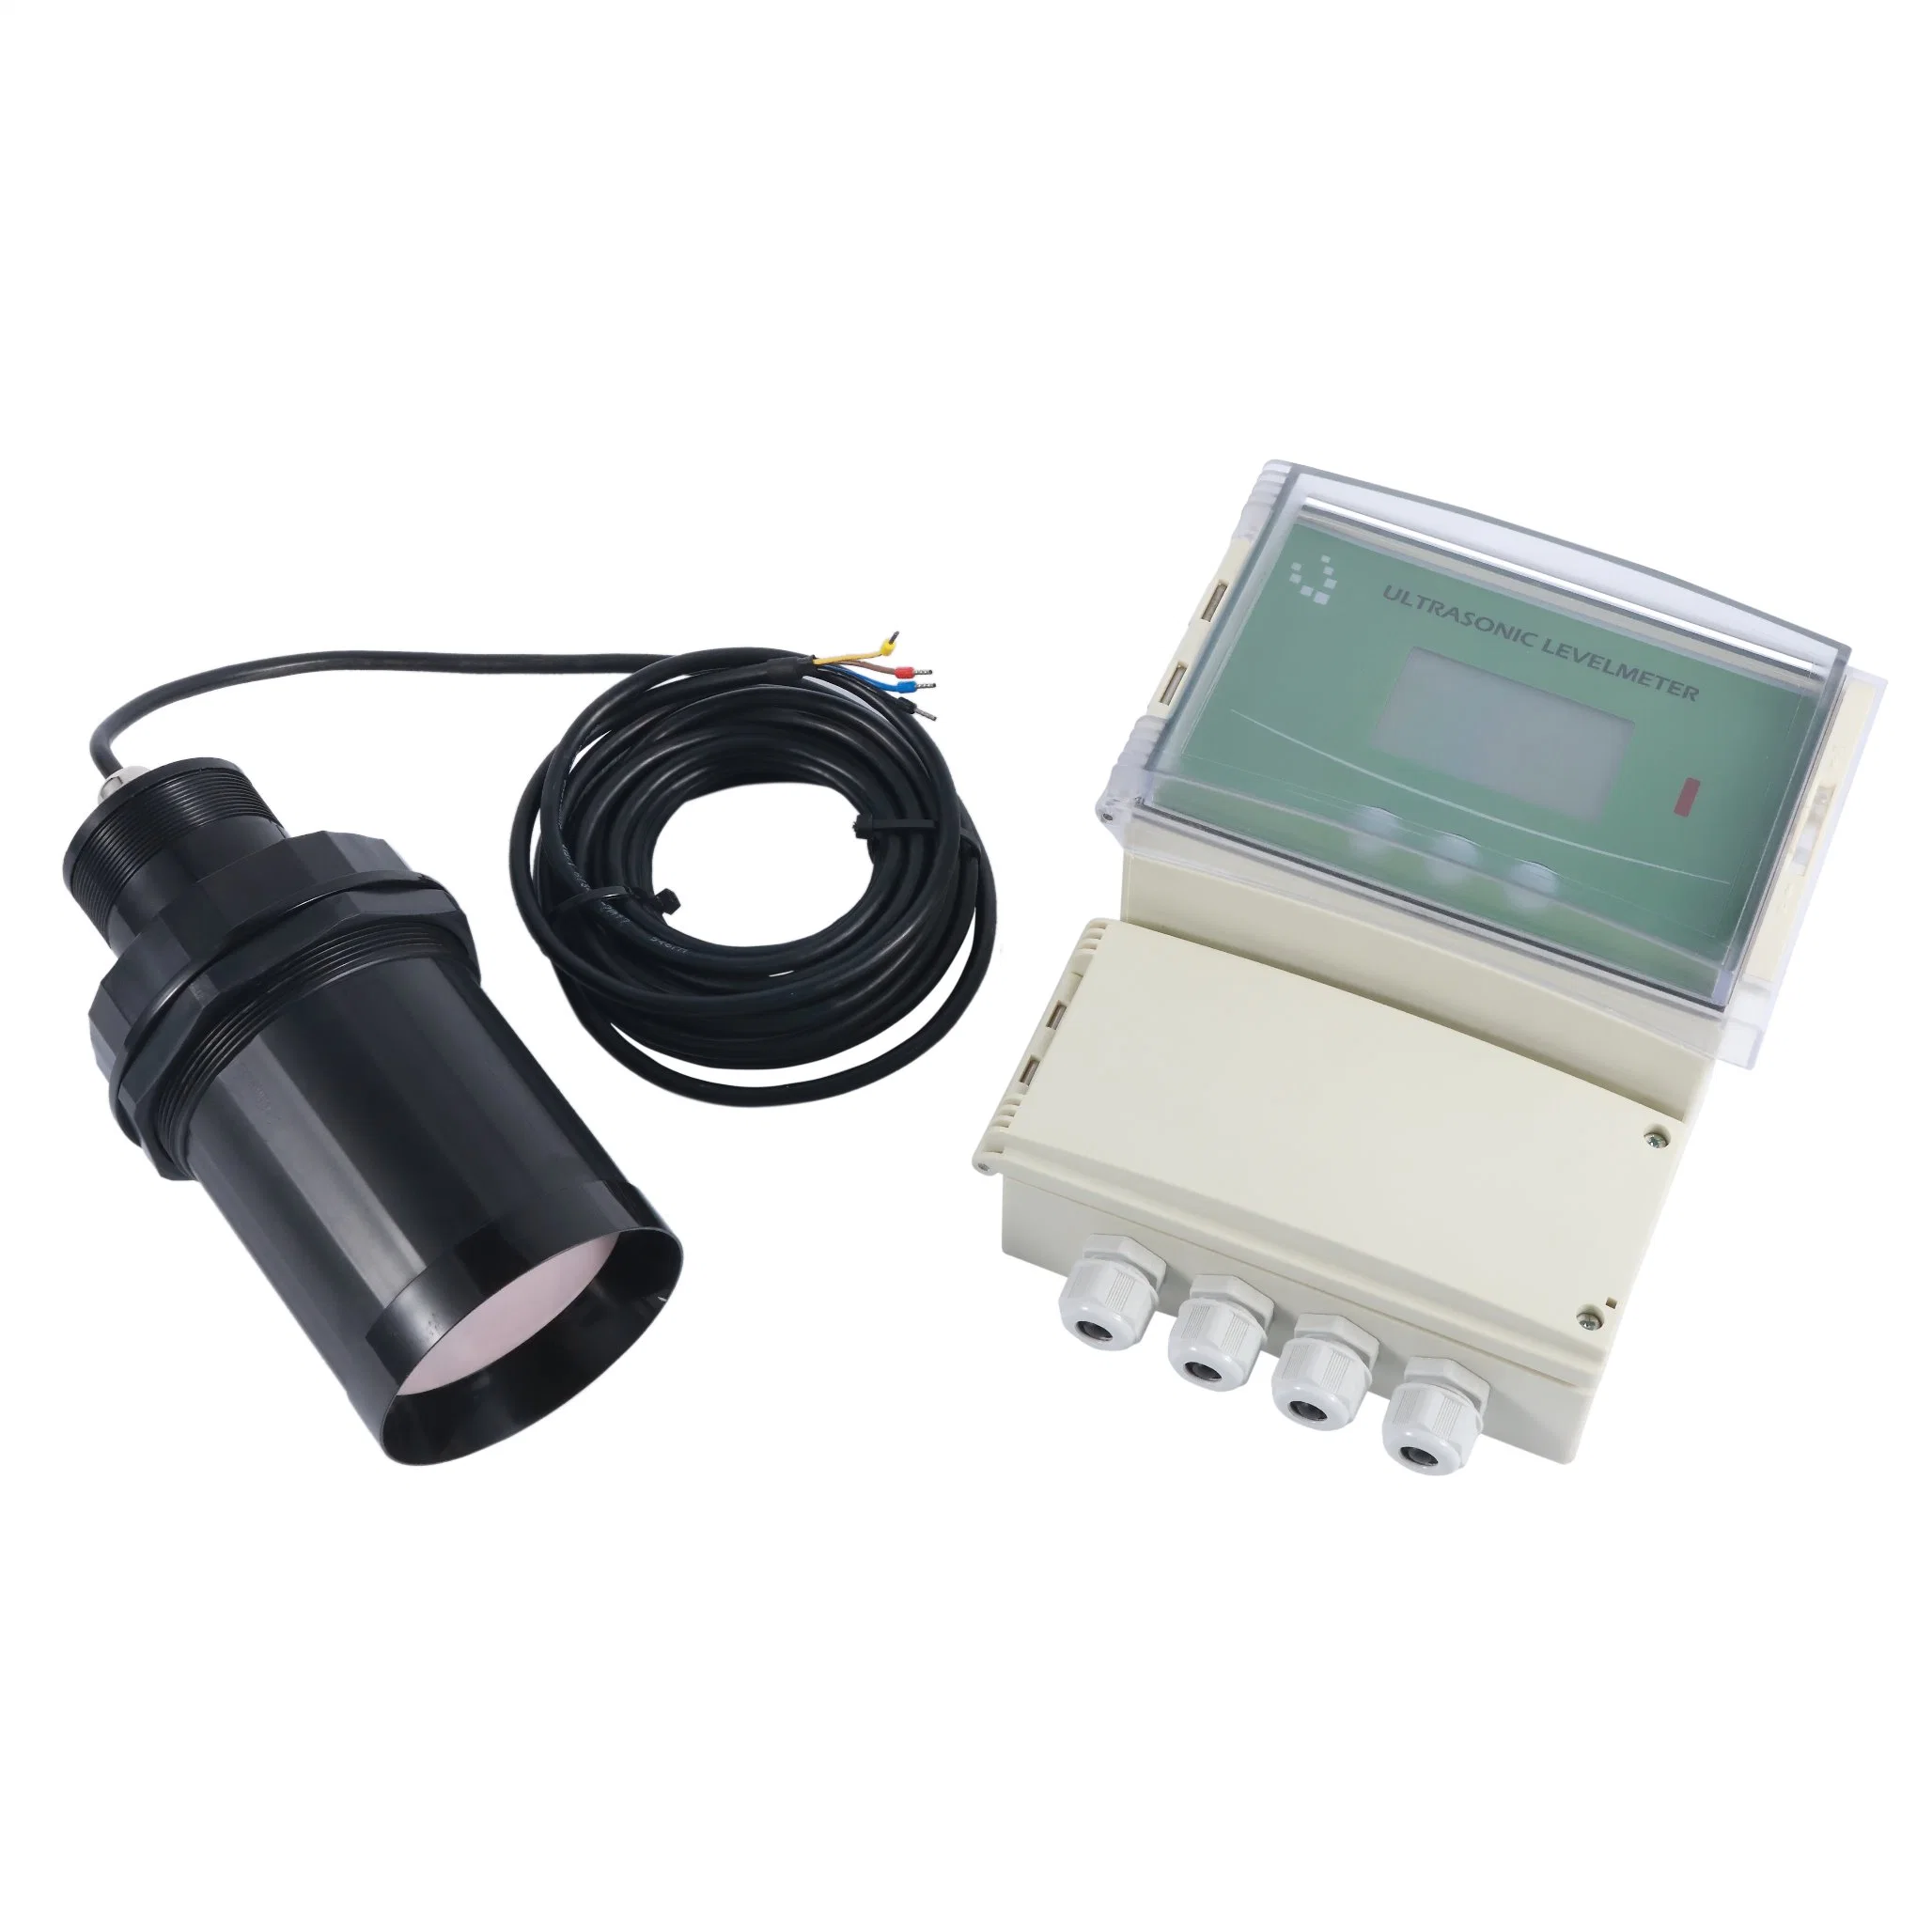 Remote Control Ultrasonic Level Transmitter with Digital Display